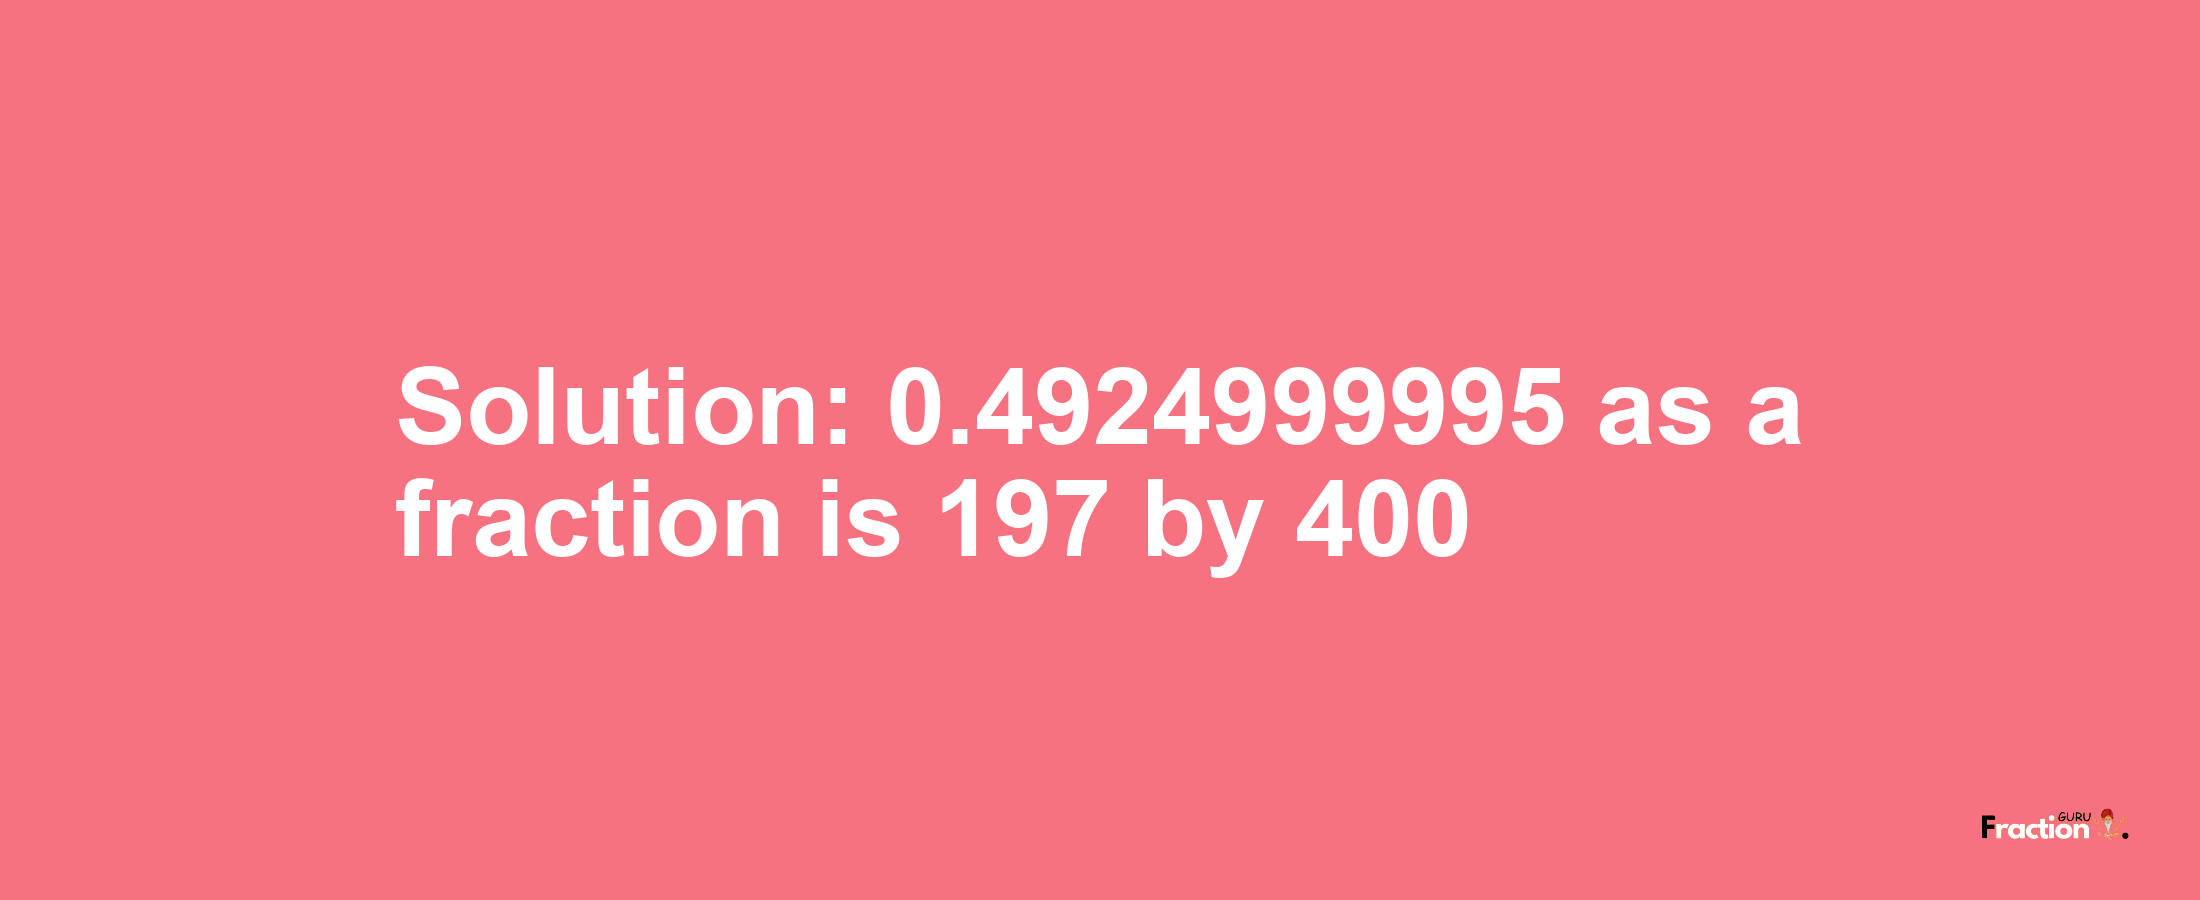 Solution:0.4924999995 as a fraction is 197/400